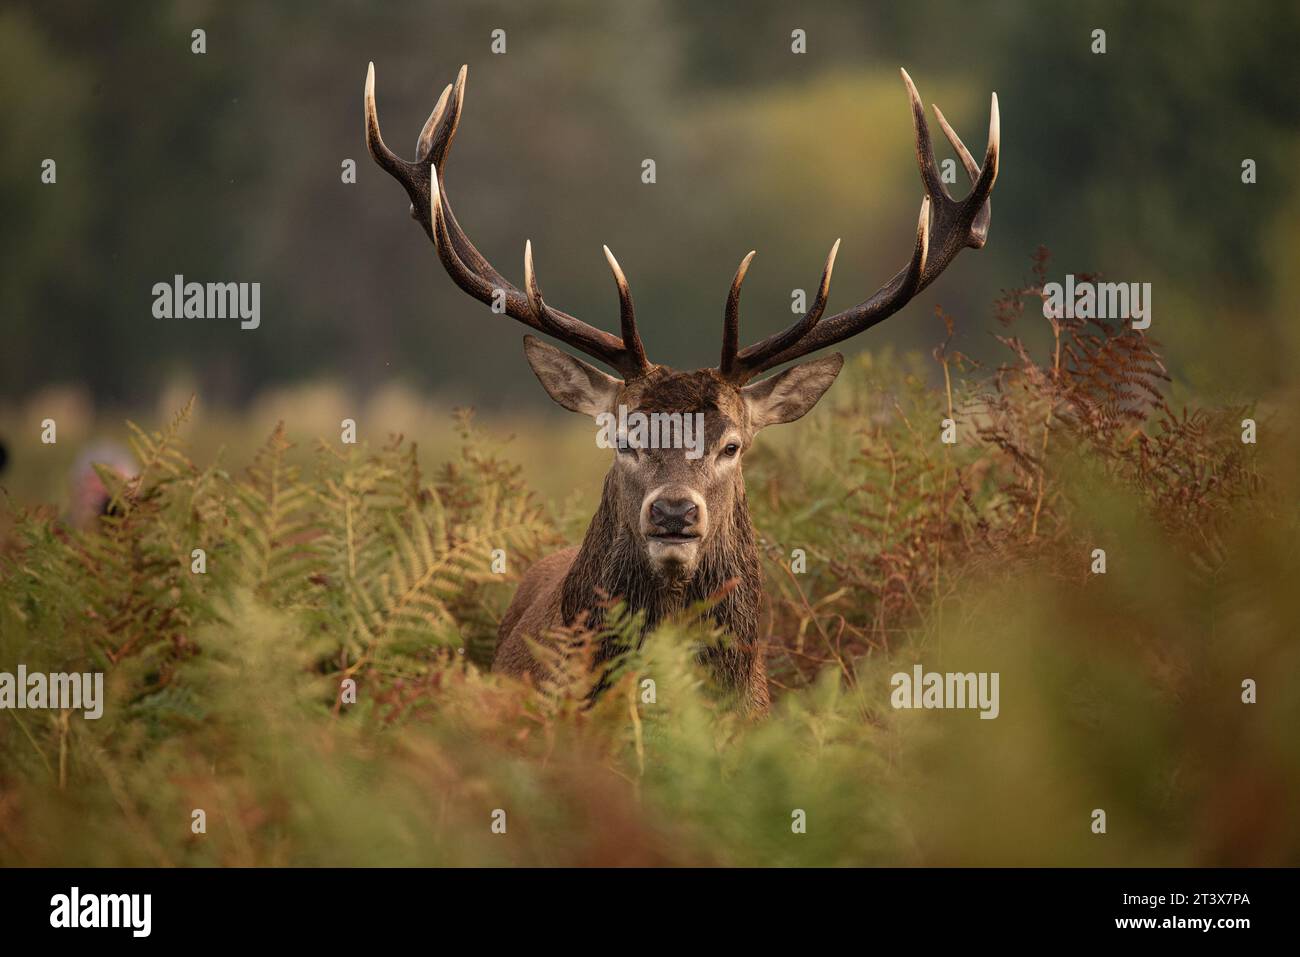 The dominant stag LONDON ETHEREAL images show a Royal Red deer stag bellowing with all his might was captured in Richmond Park, London, on October 21s Stock Photo